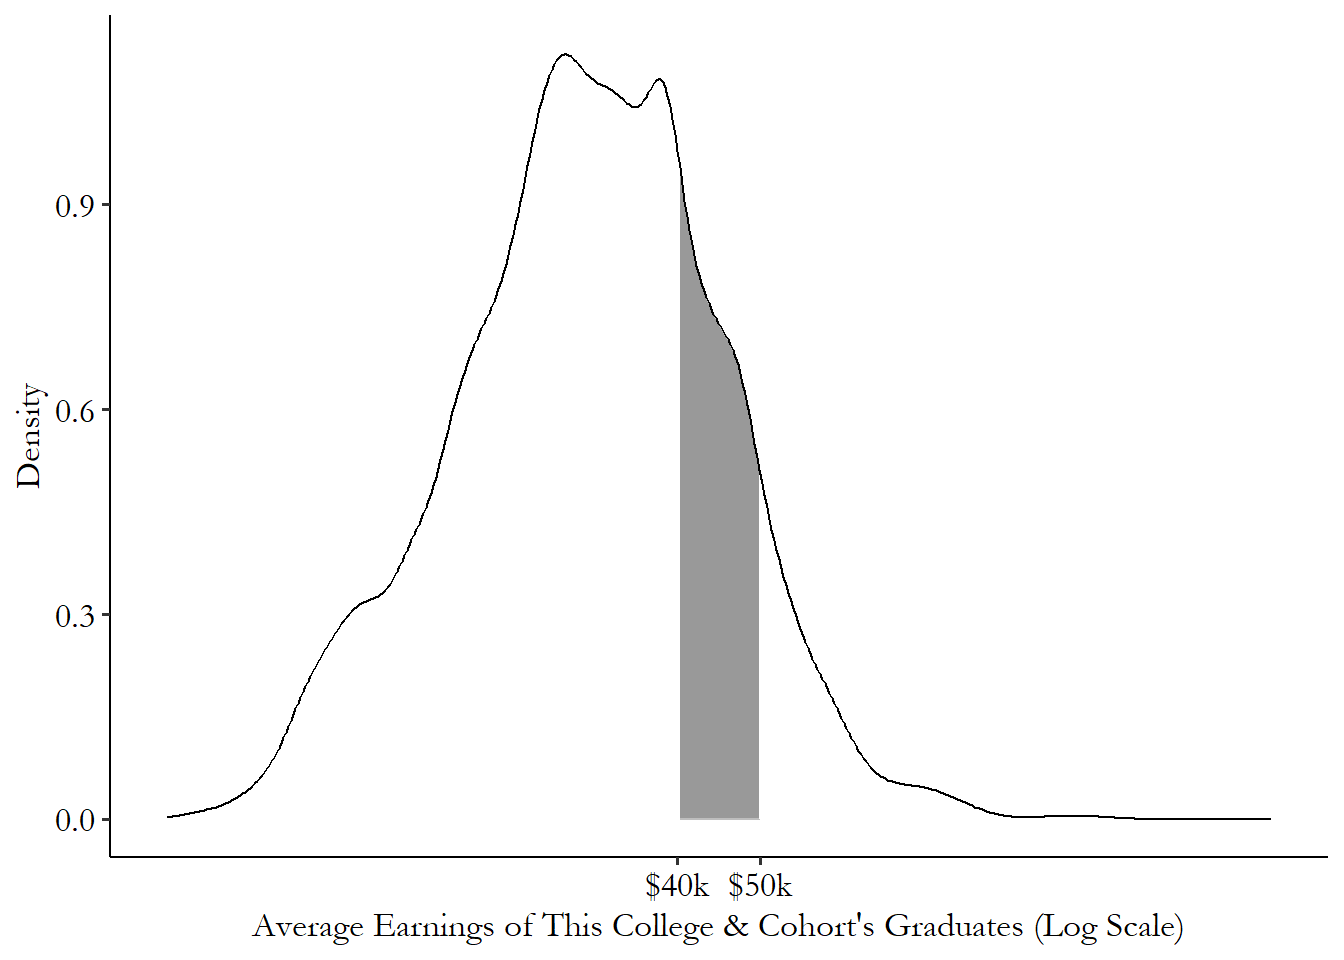 Density plot of the average earnings of a college cohort, with the area between 40k and 50k dollars shaded in.